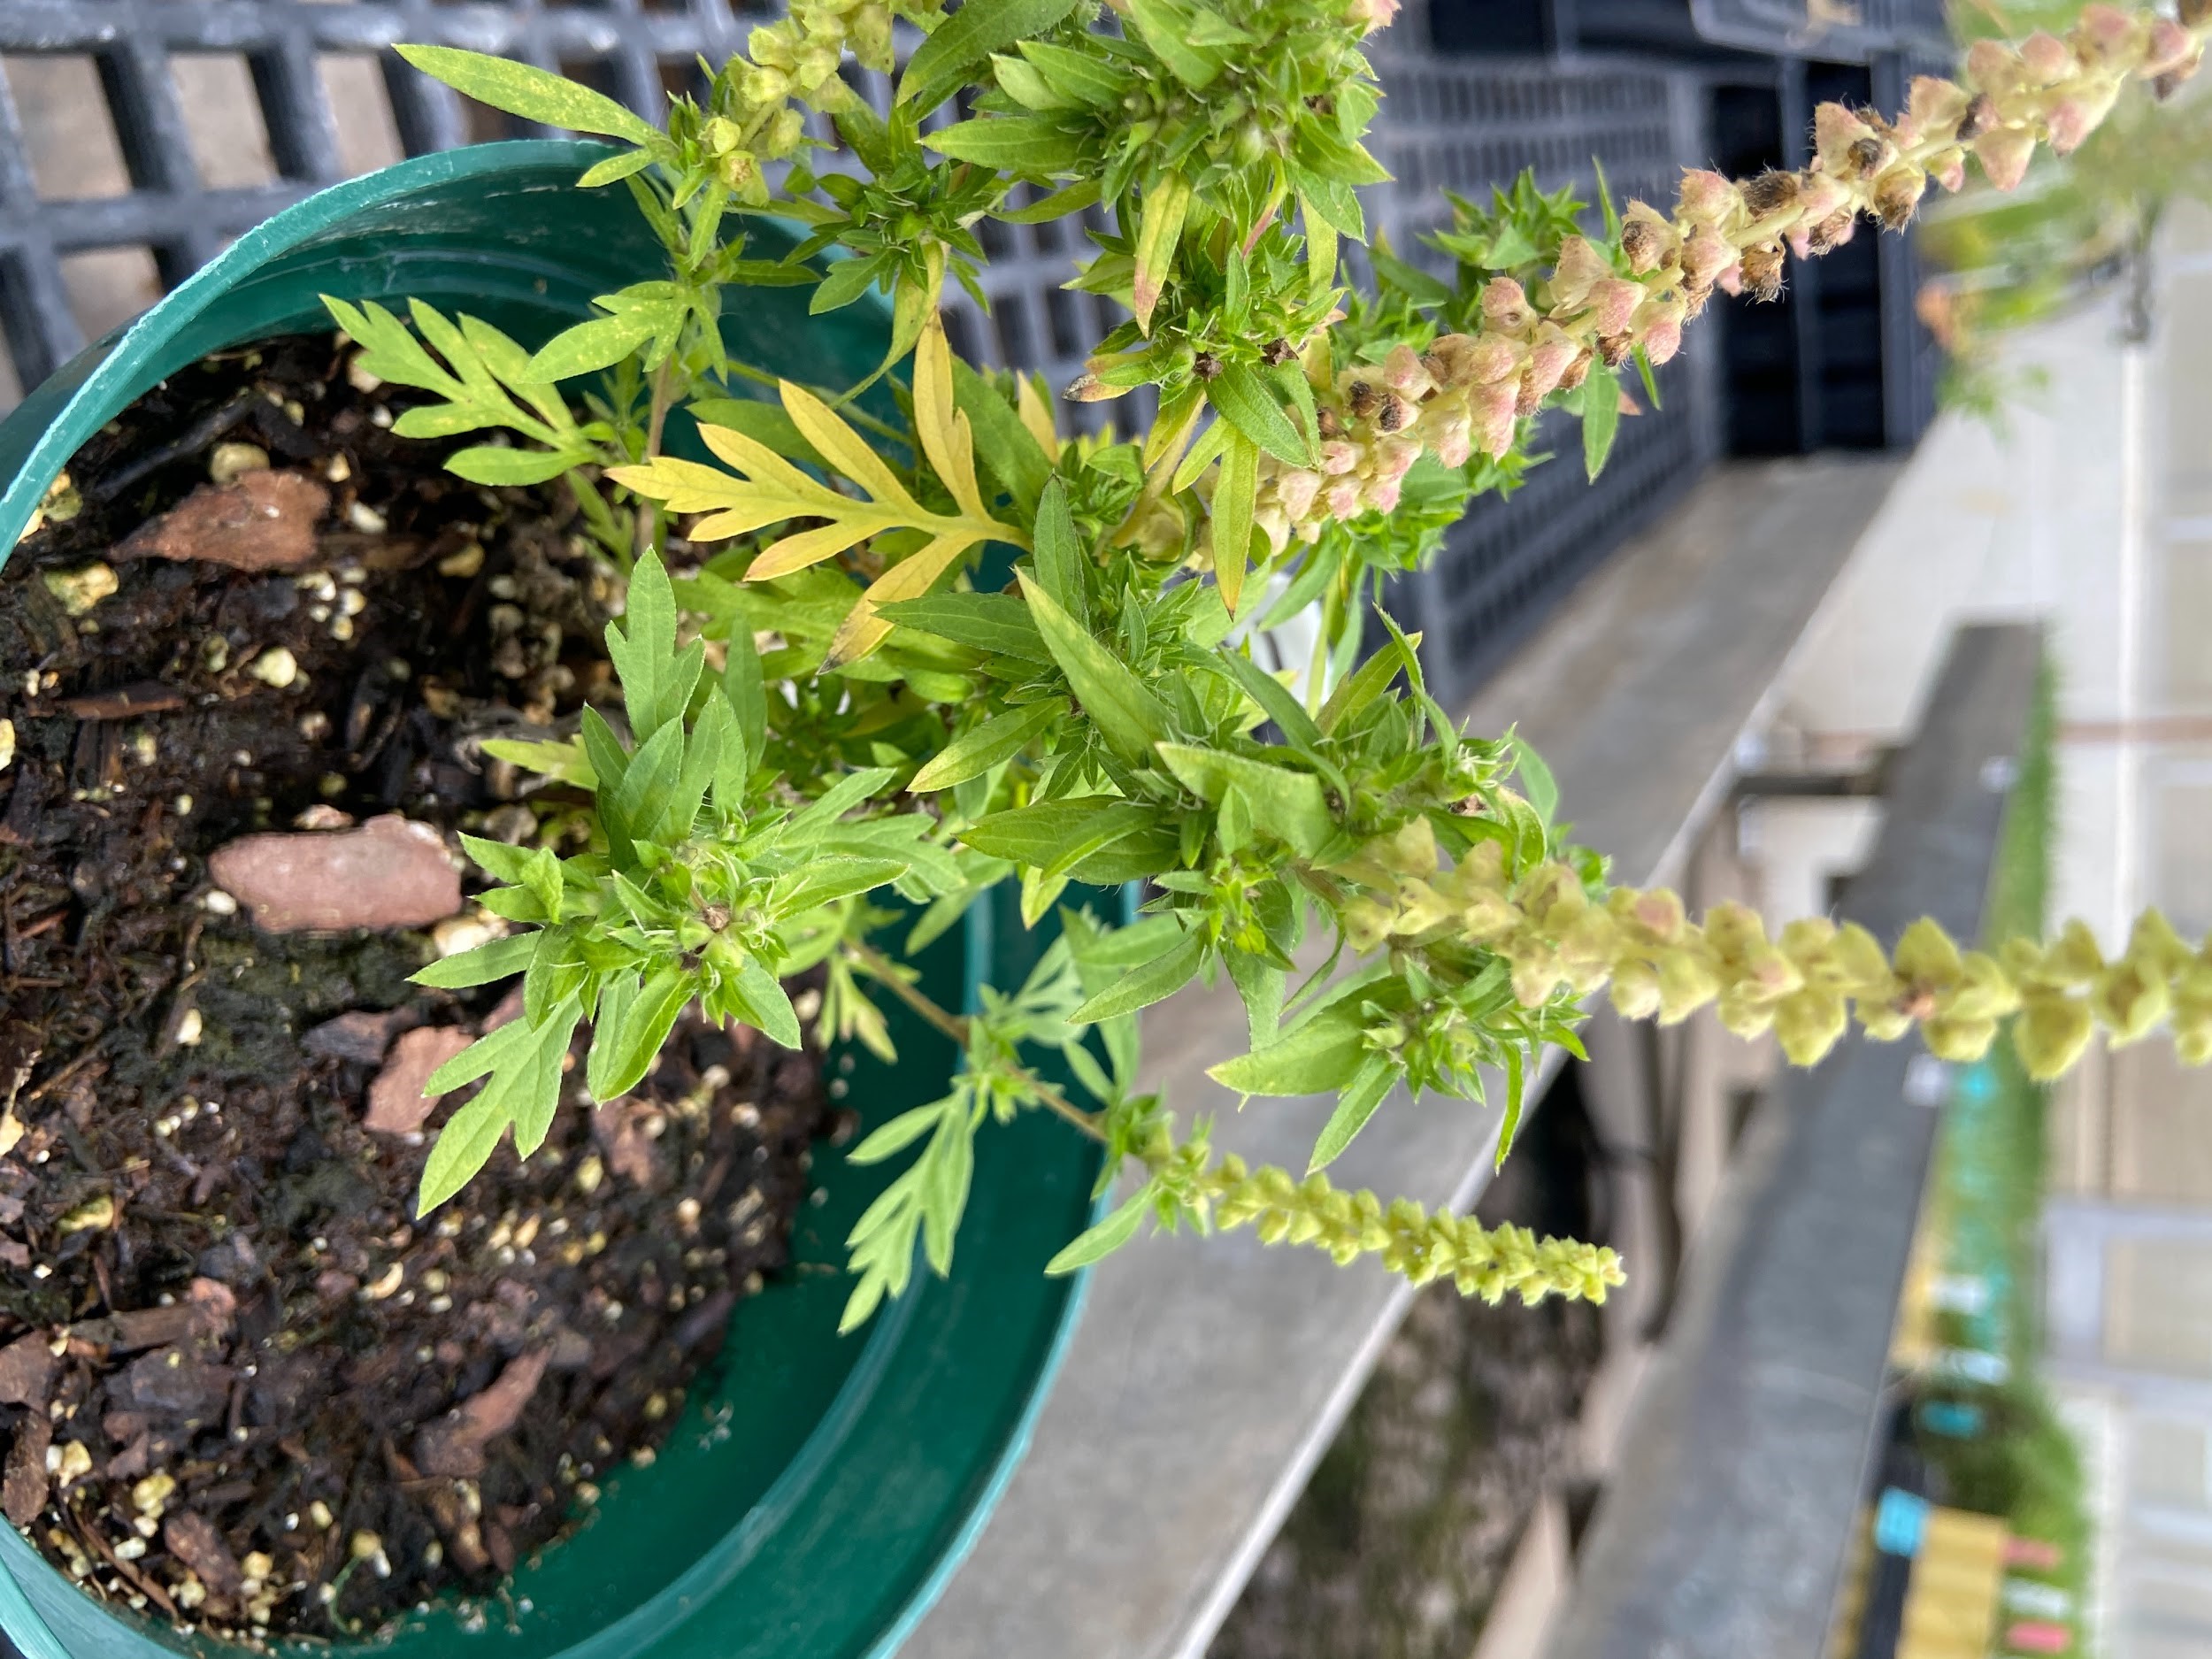 Common ragweed planting growing in a pot in the greenhouse